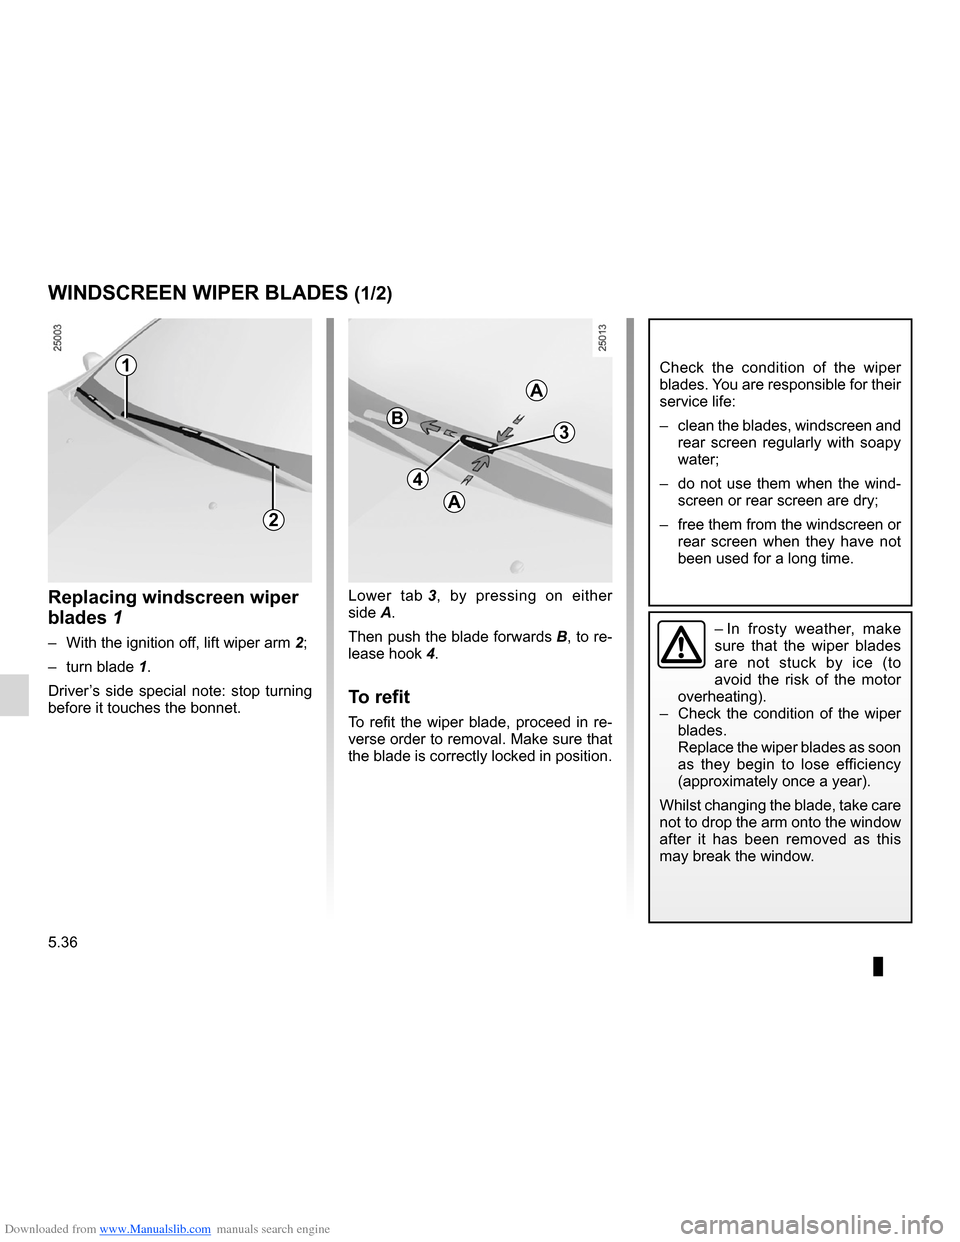 RENAULT CLIO 2012 X85 / 3.G Owners Manual Downloaded from www.Manualslib.com manuals search engine wiper blades ......................................... (up to the end of the DU)
wipers blades  ............................................. (